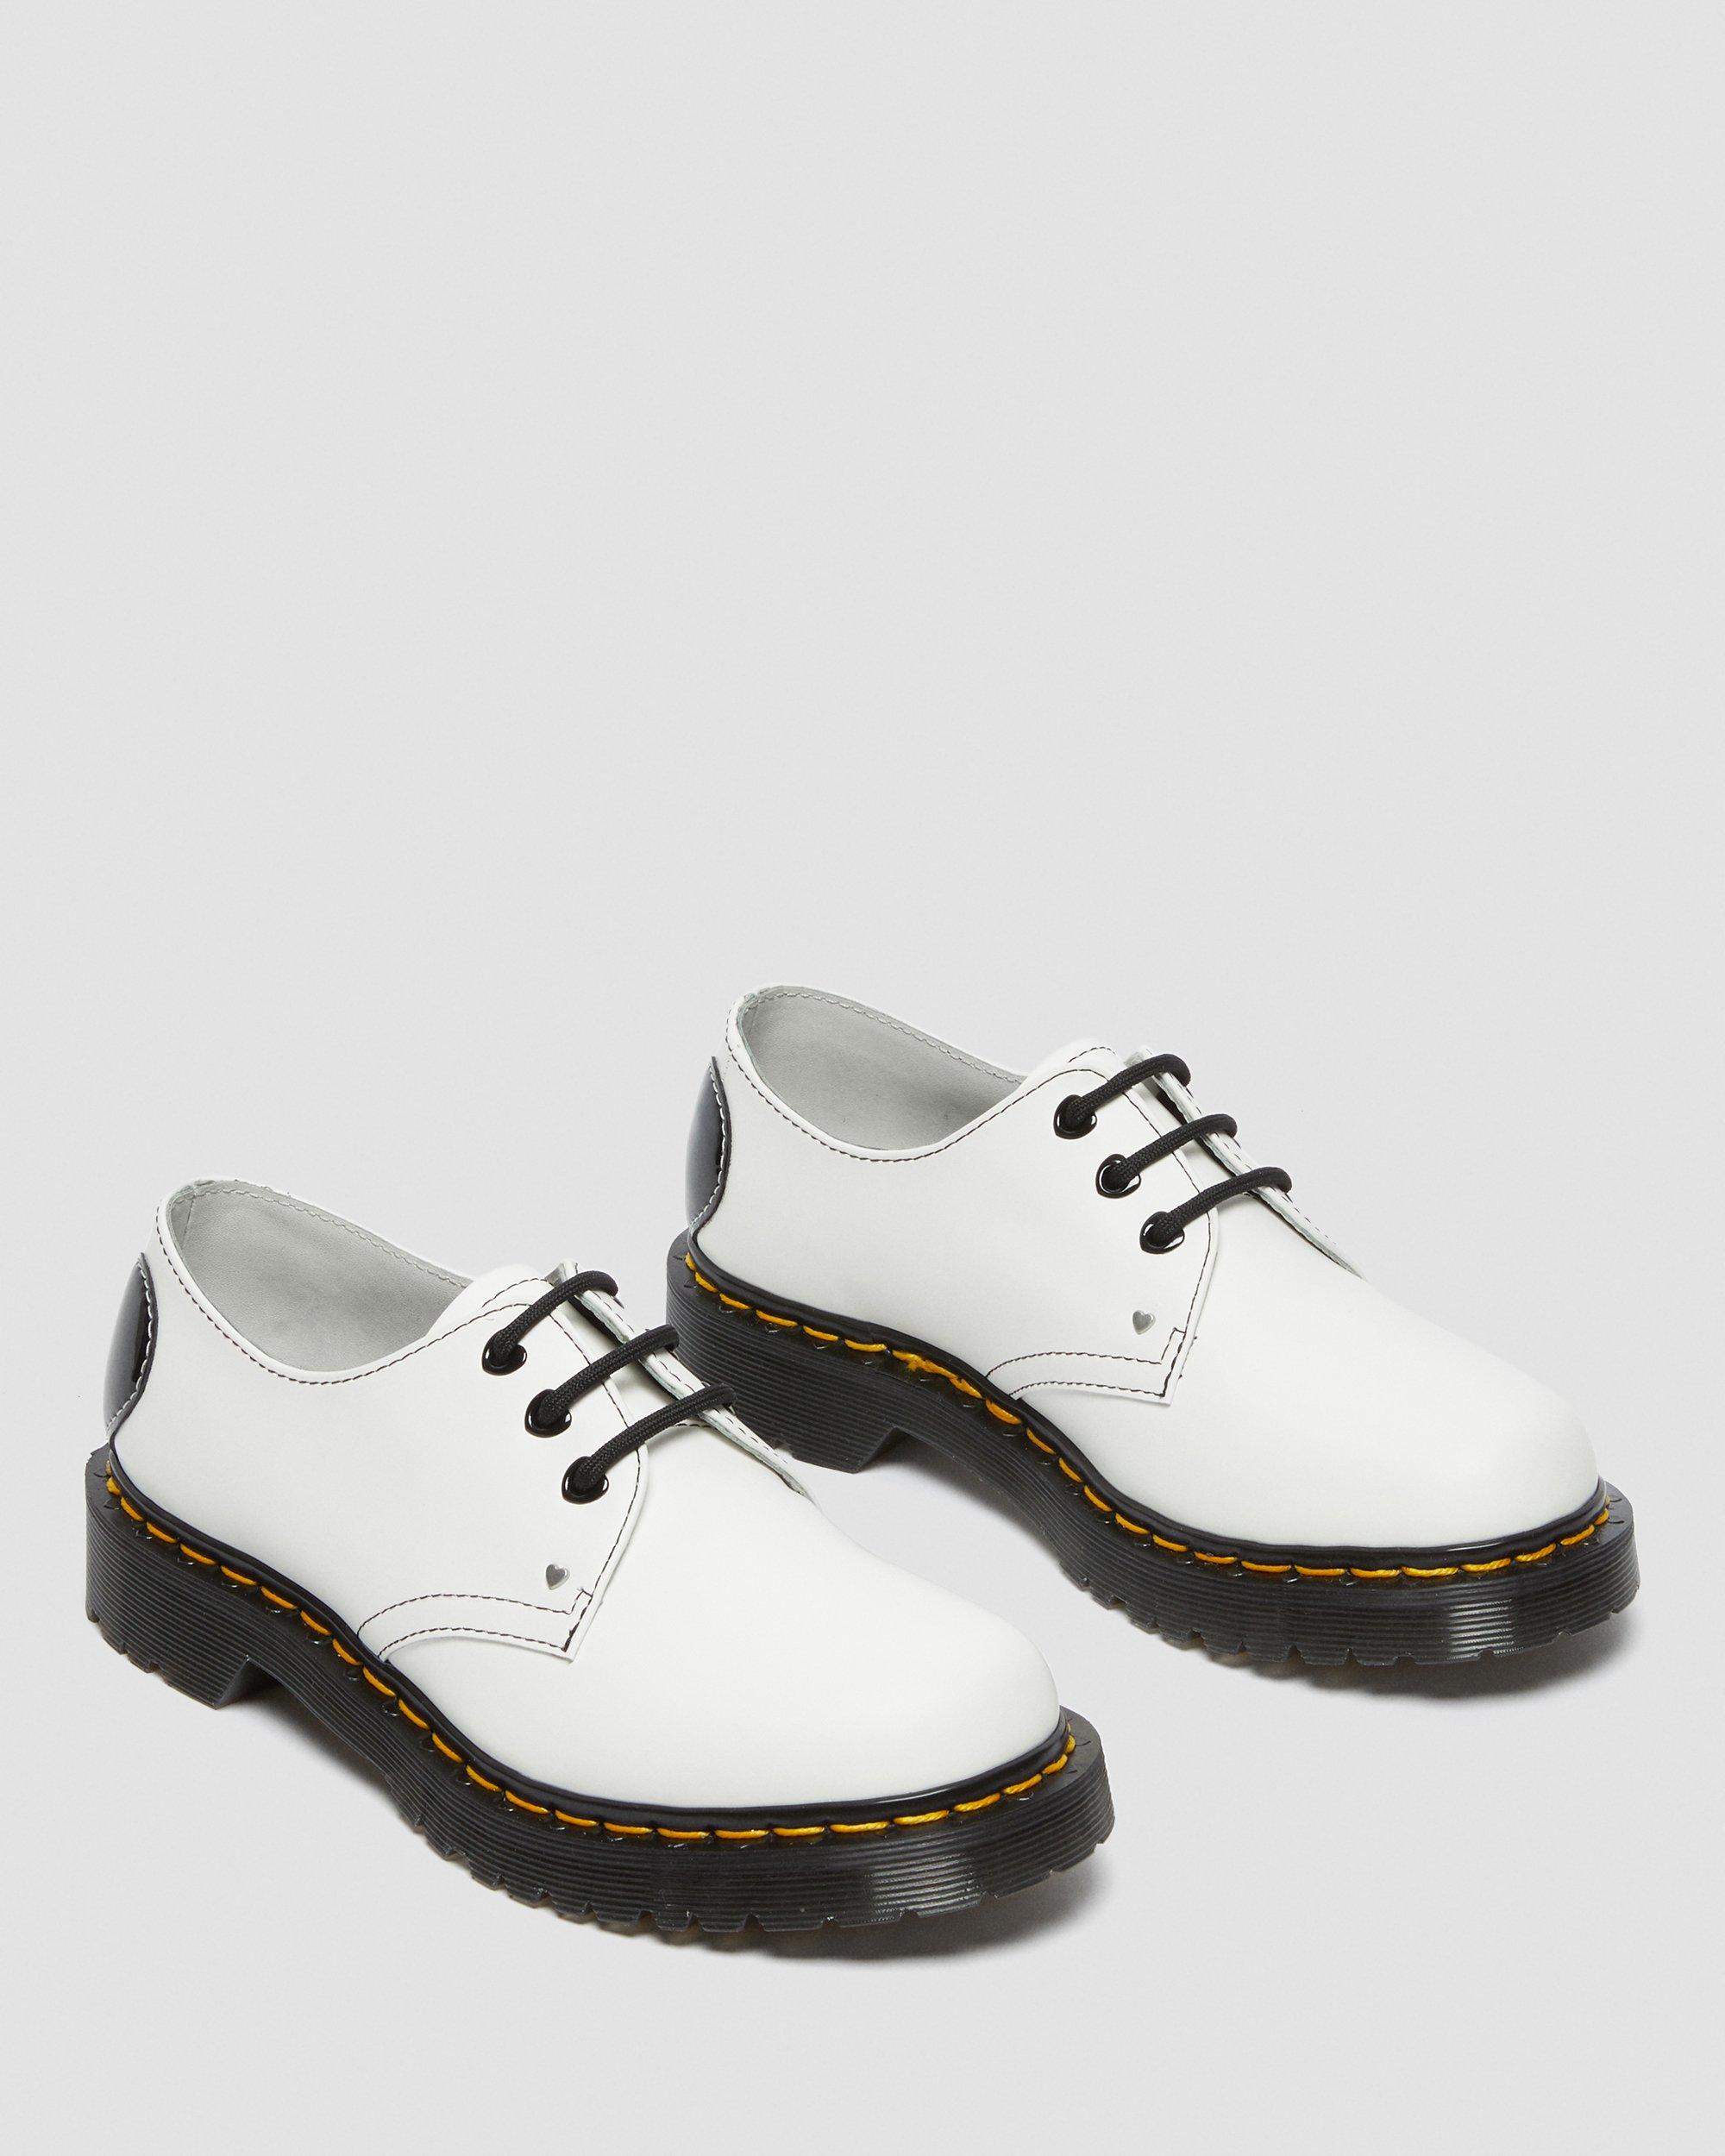 Patent Leather Oxford Shoes 